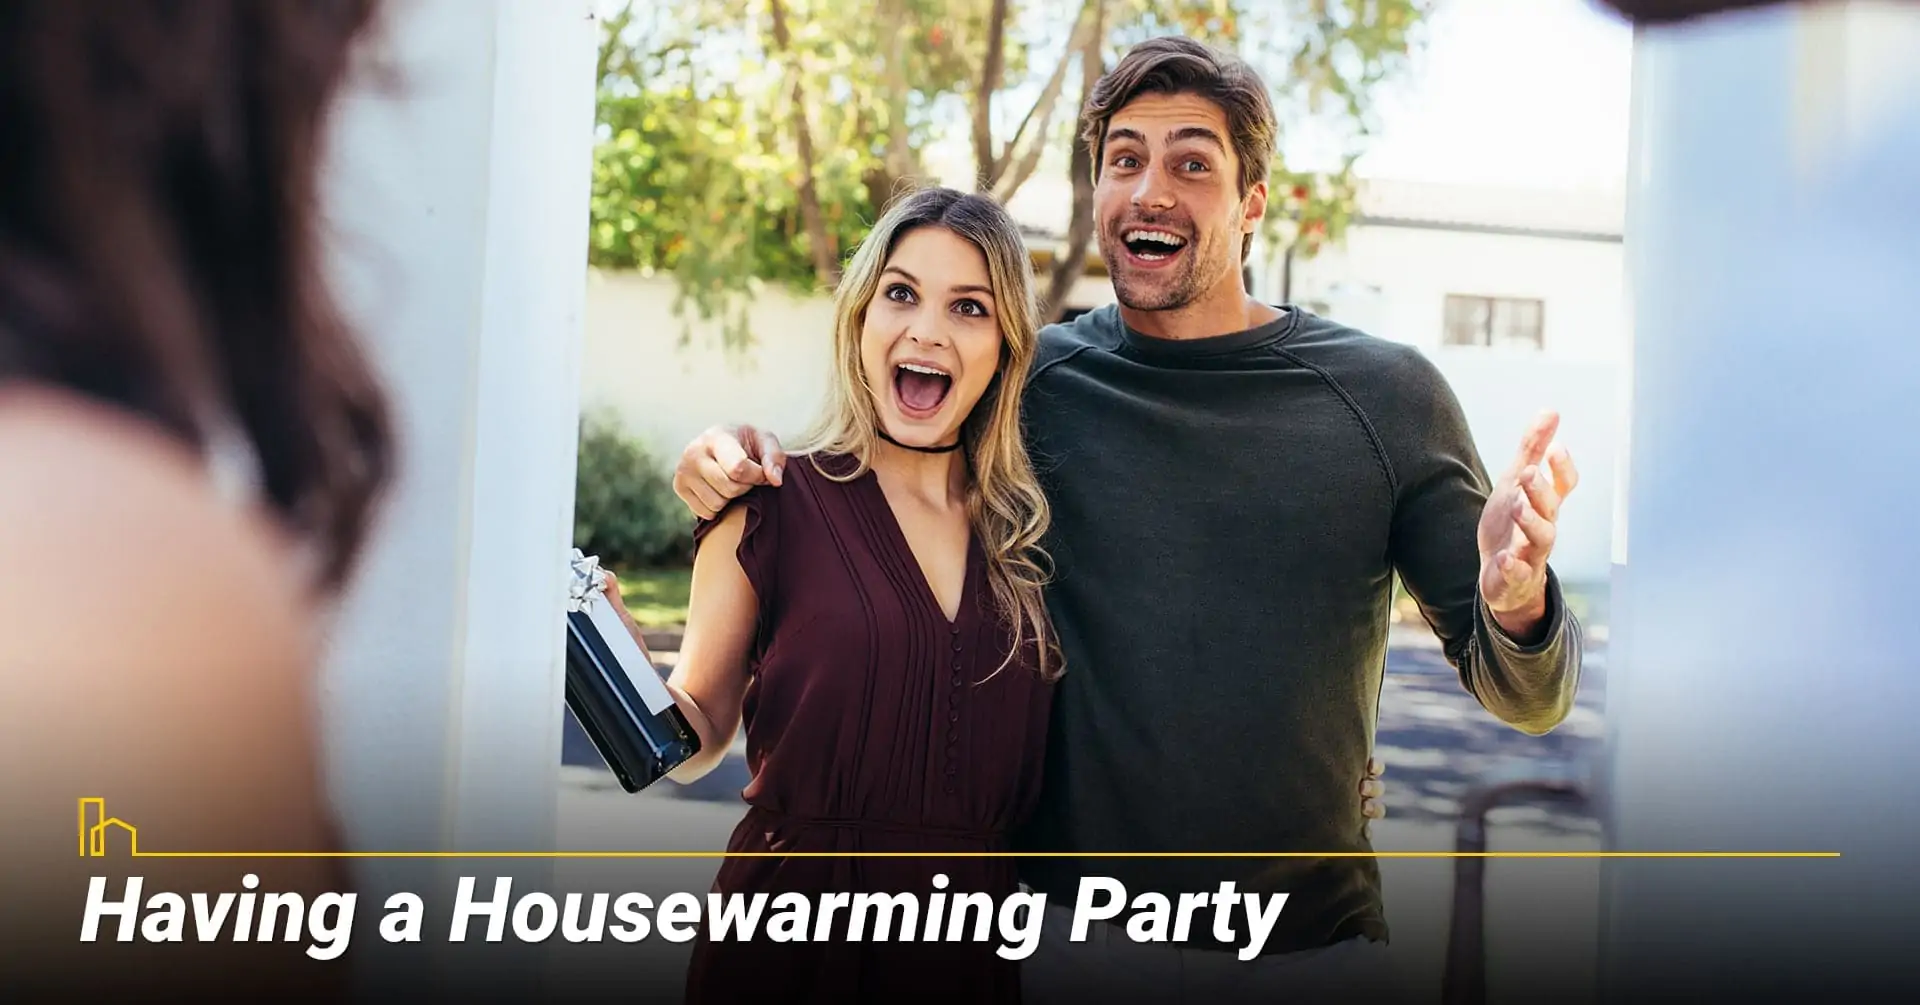 Having a Housewarming Party, invite people to your new home